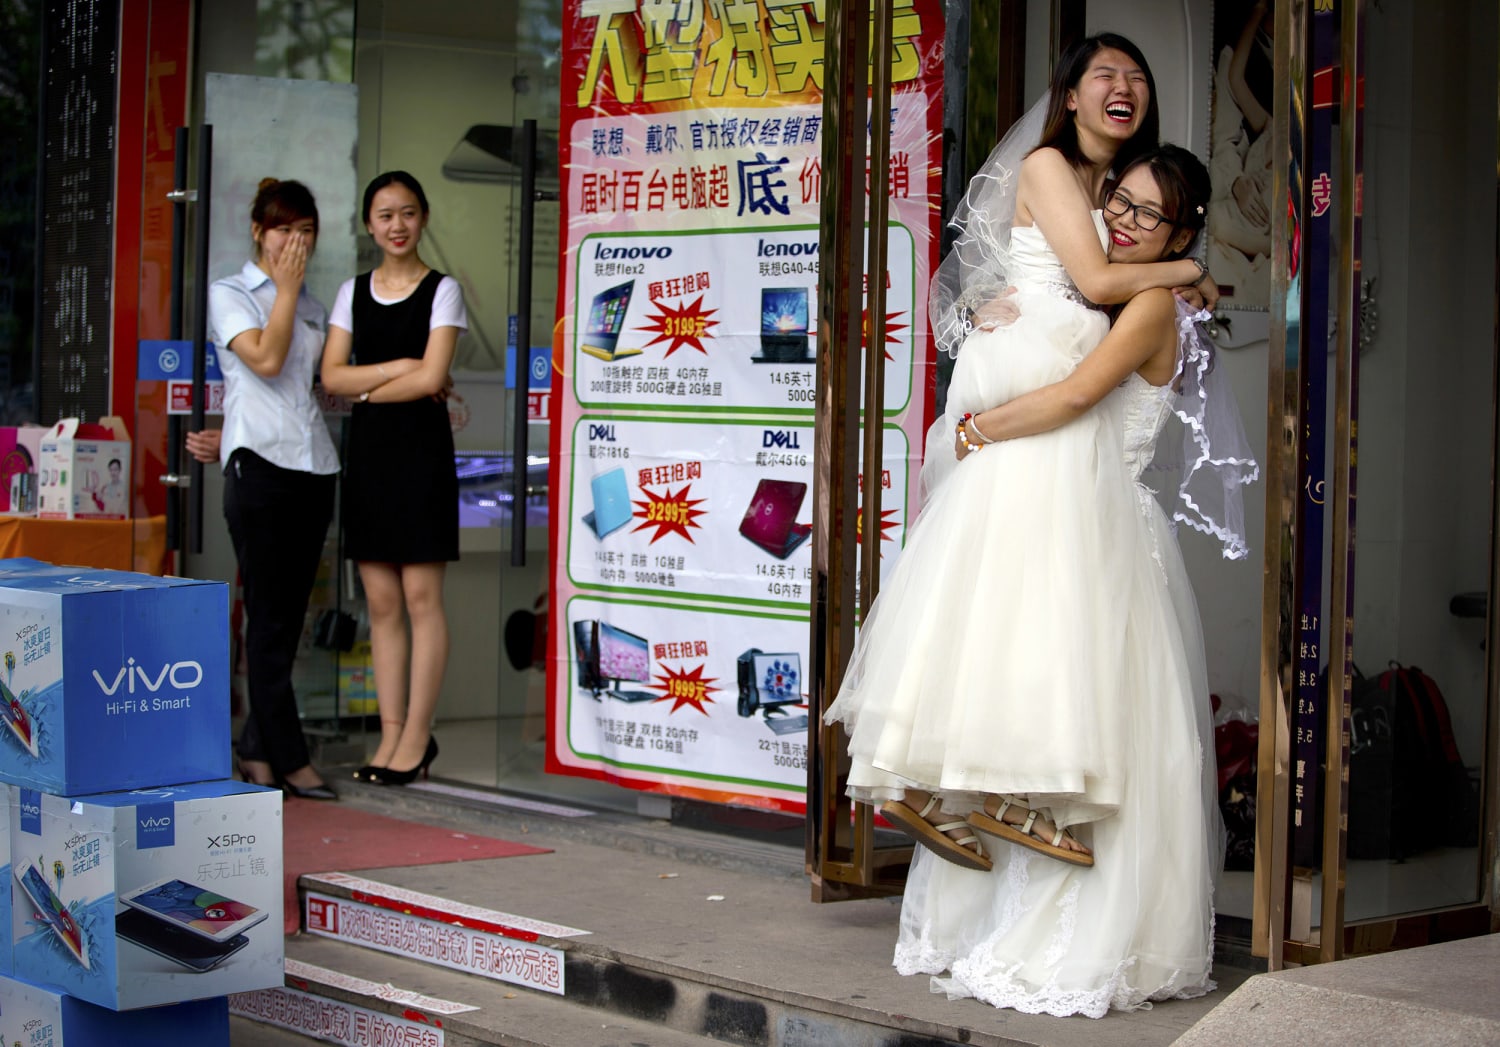 Why is China raising the prospect of same-sex marriage? pic